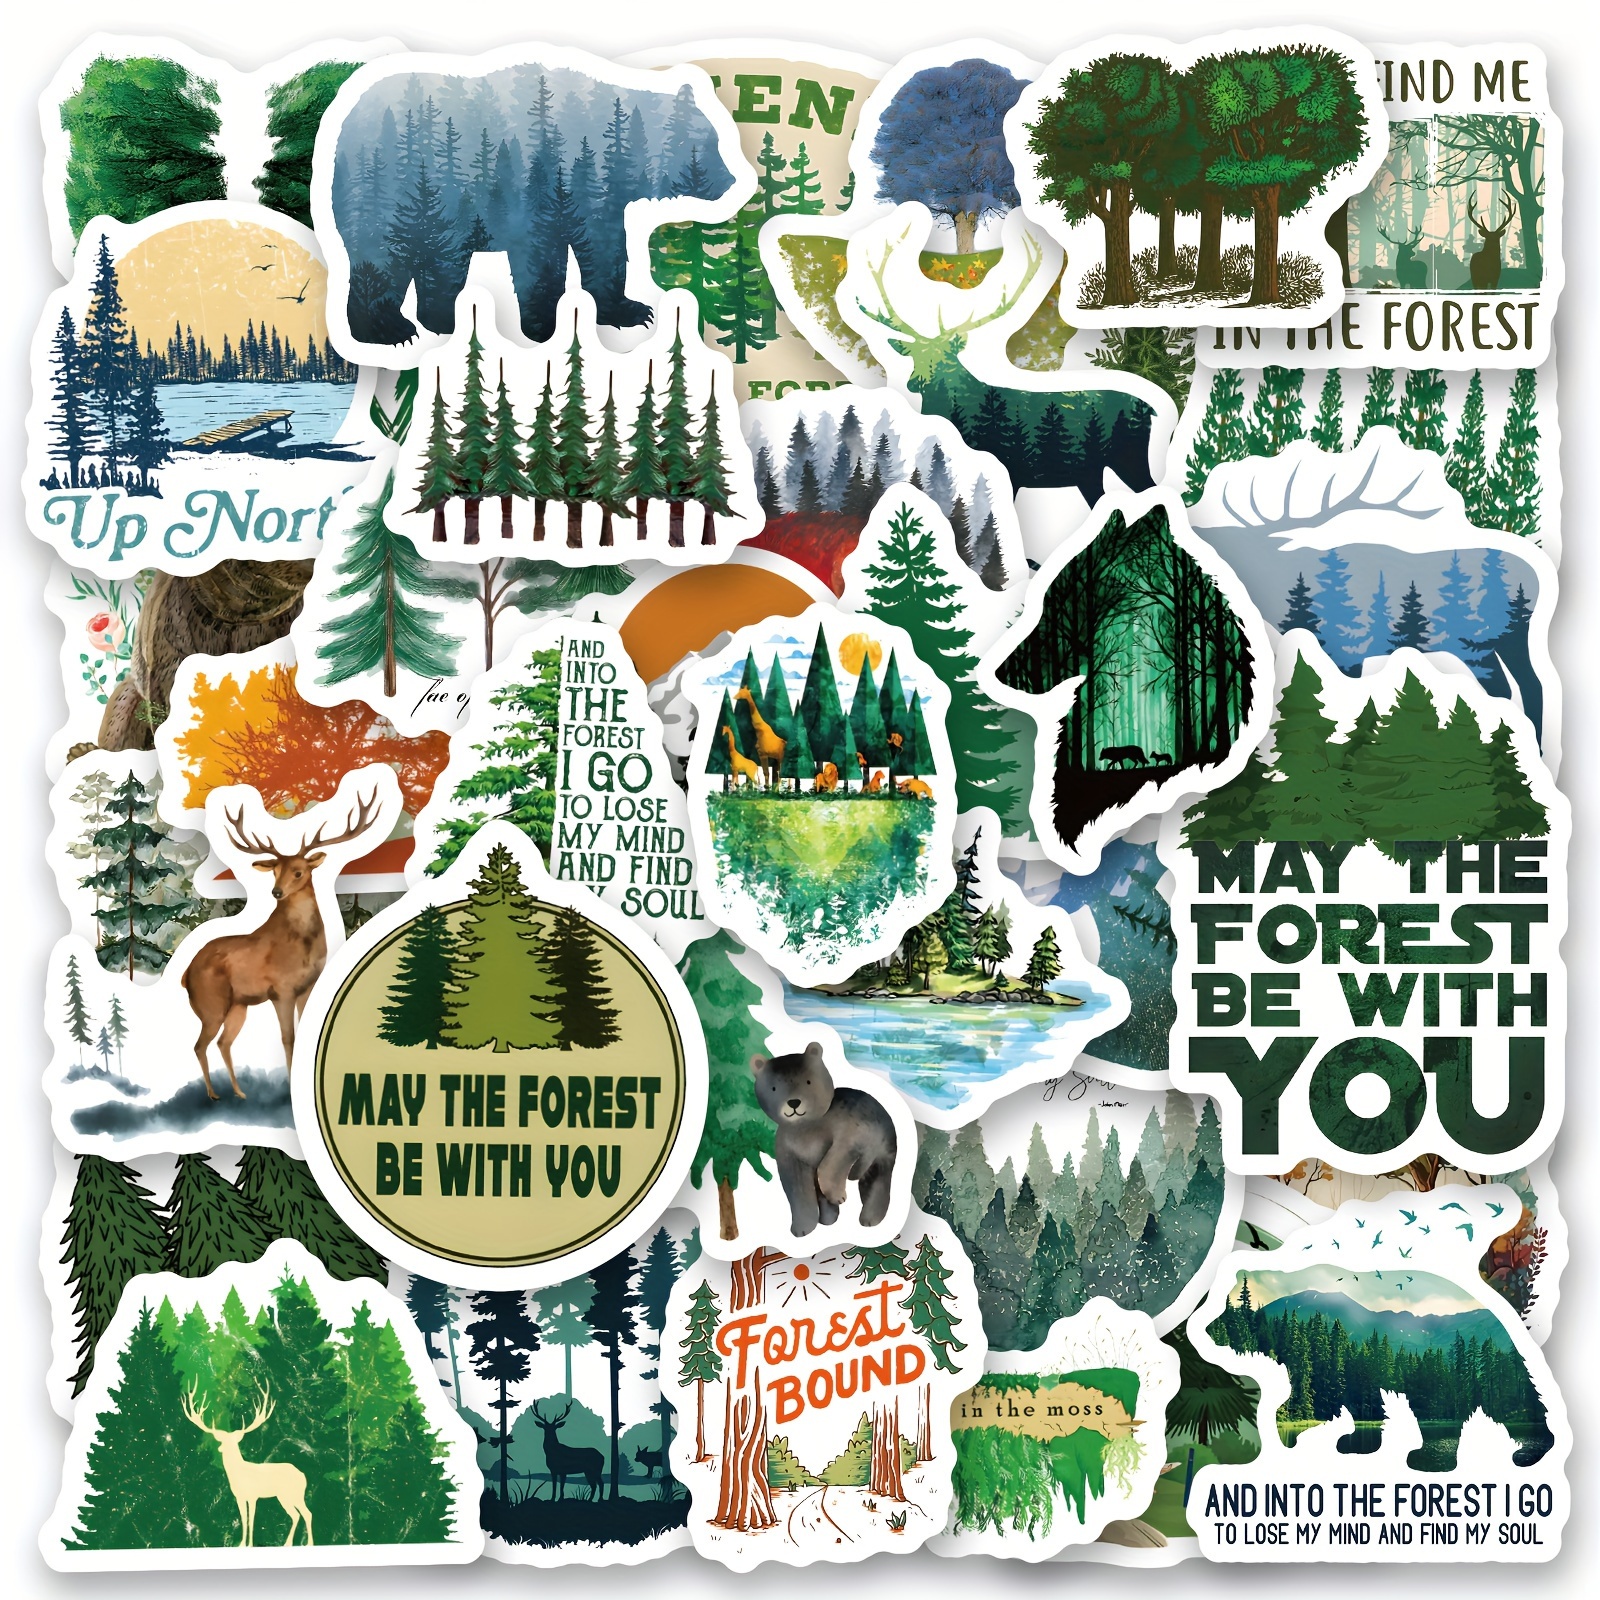 Green Forest Stickers Pack, 50pcs, Aesthetic Vinyl Decals, Stickers For  Hydro Flask, Water Bottle, Skateboard. Forest